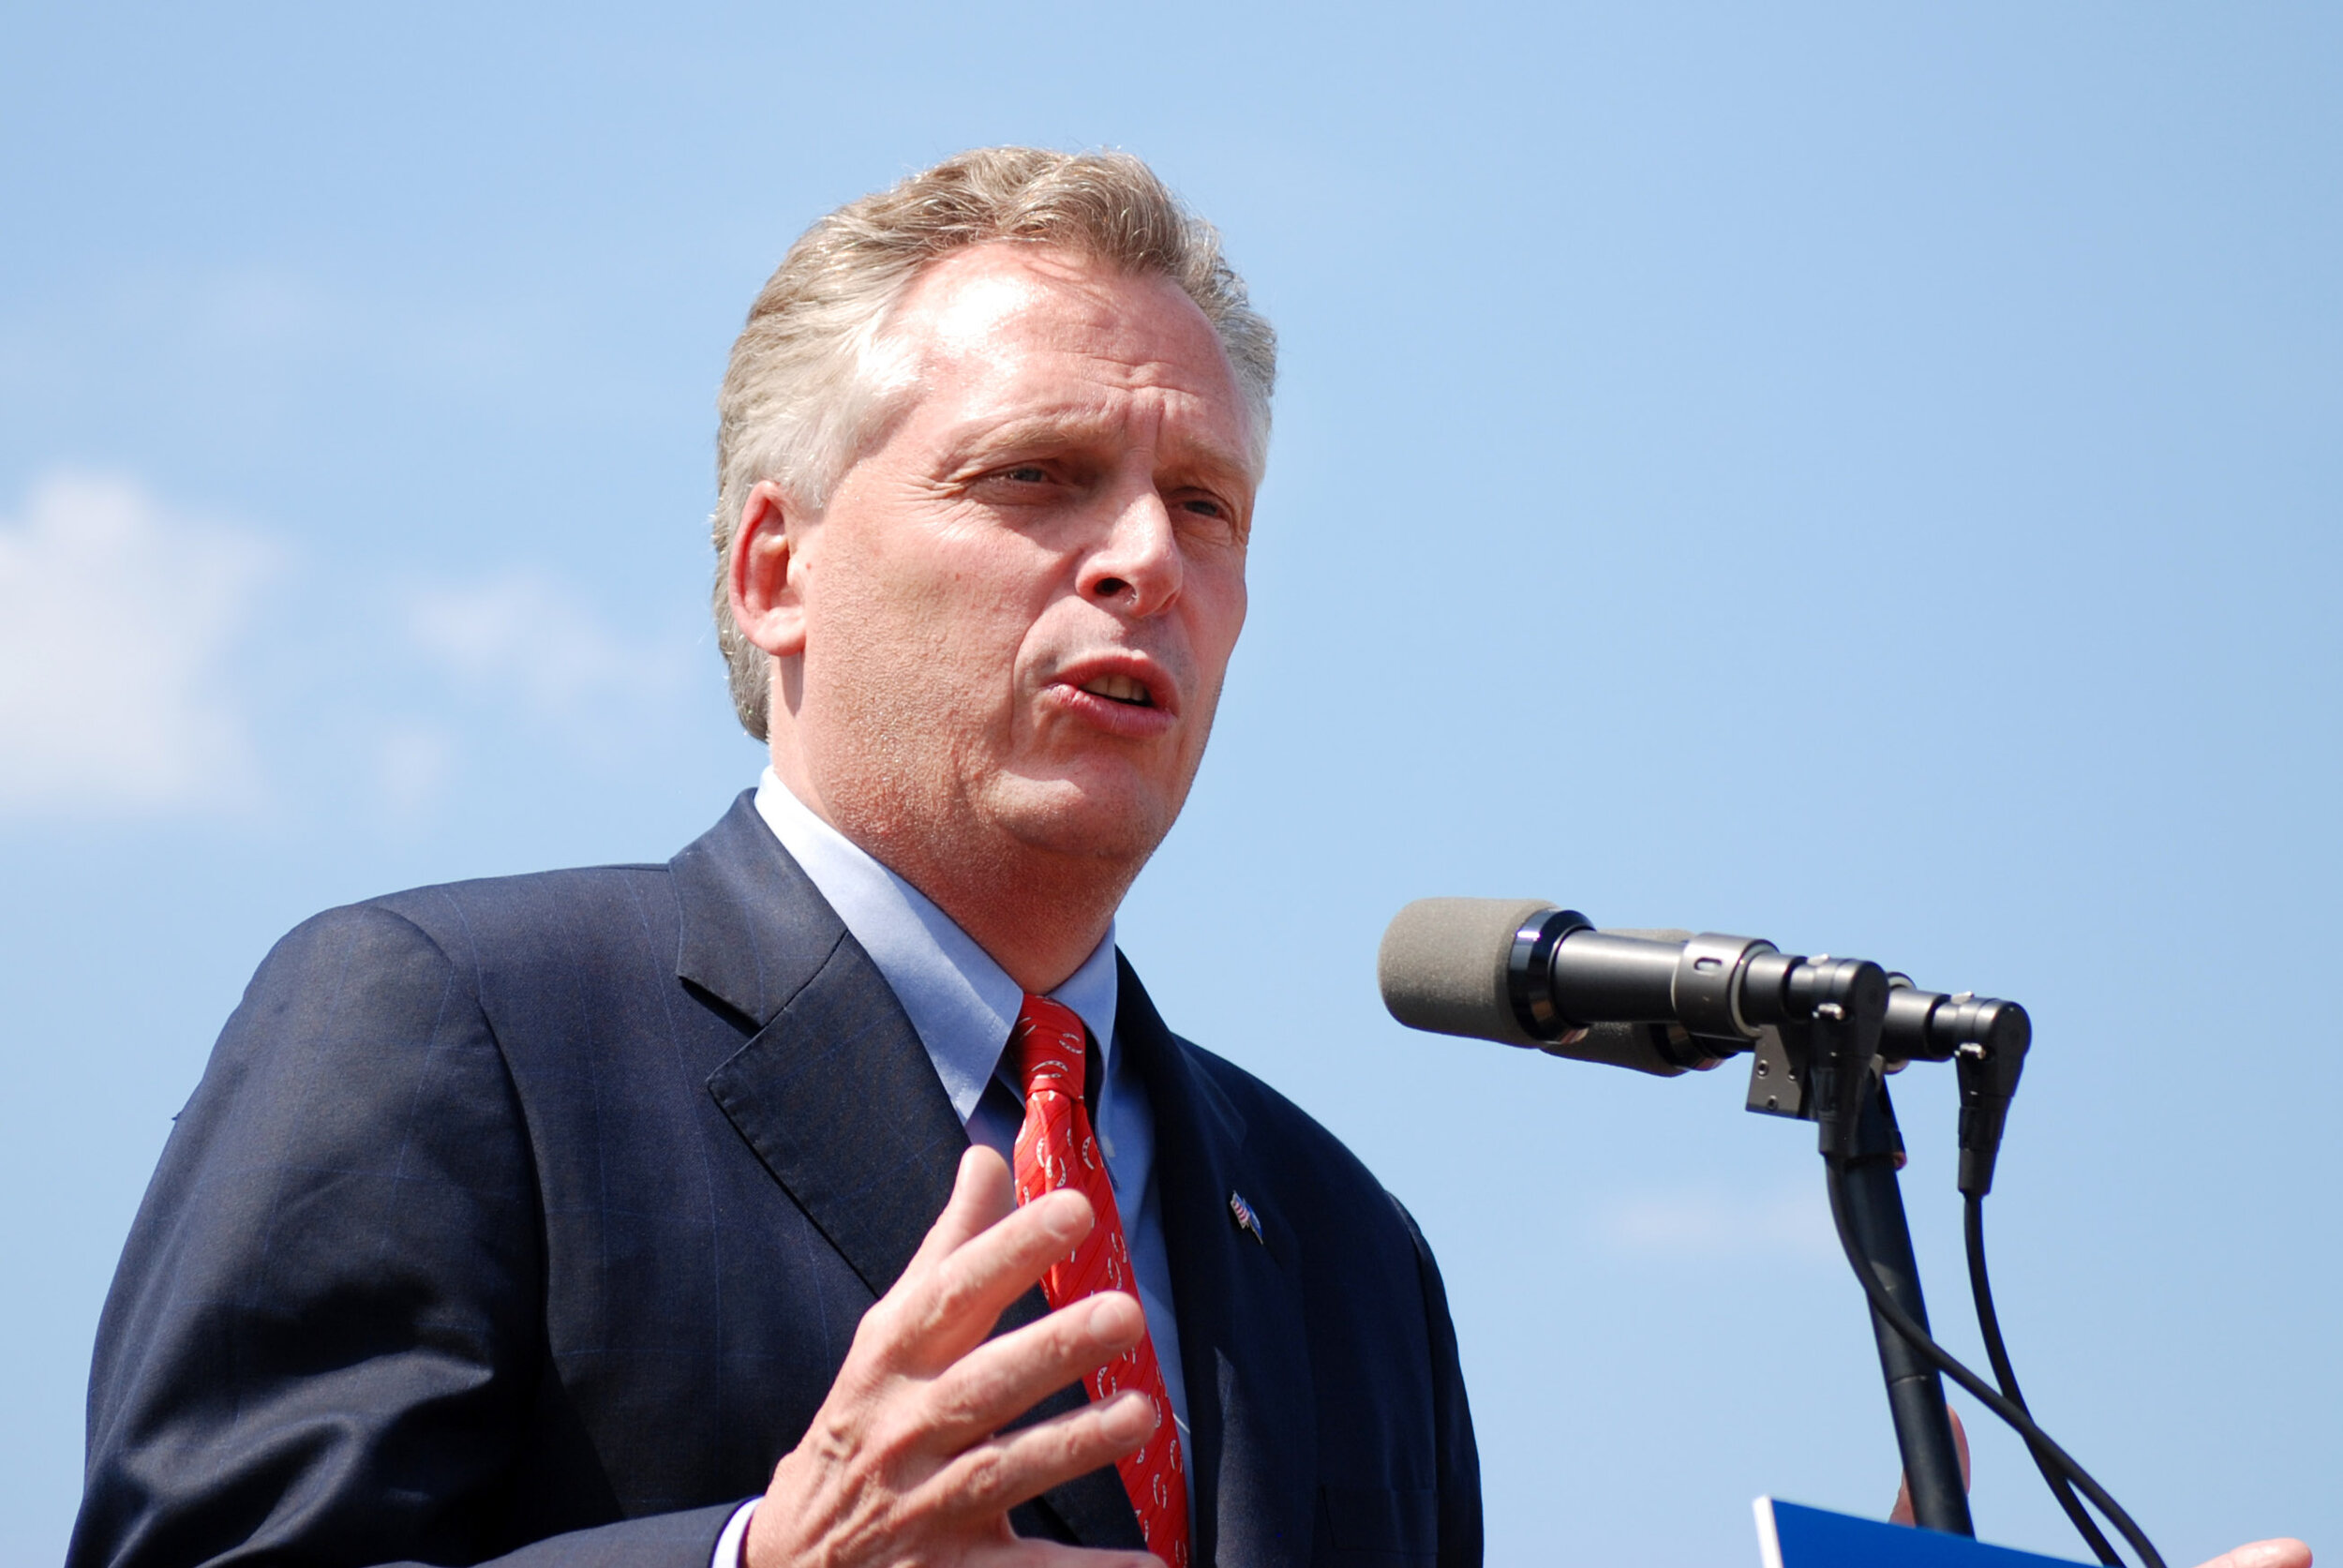 Virginia: Lack Of Cannabis Messaging In Governor’s Race A ‘Missed Opportunity’ For McAuliffe, Experts Say